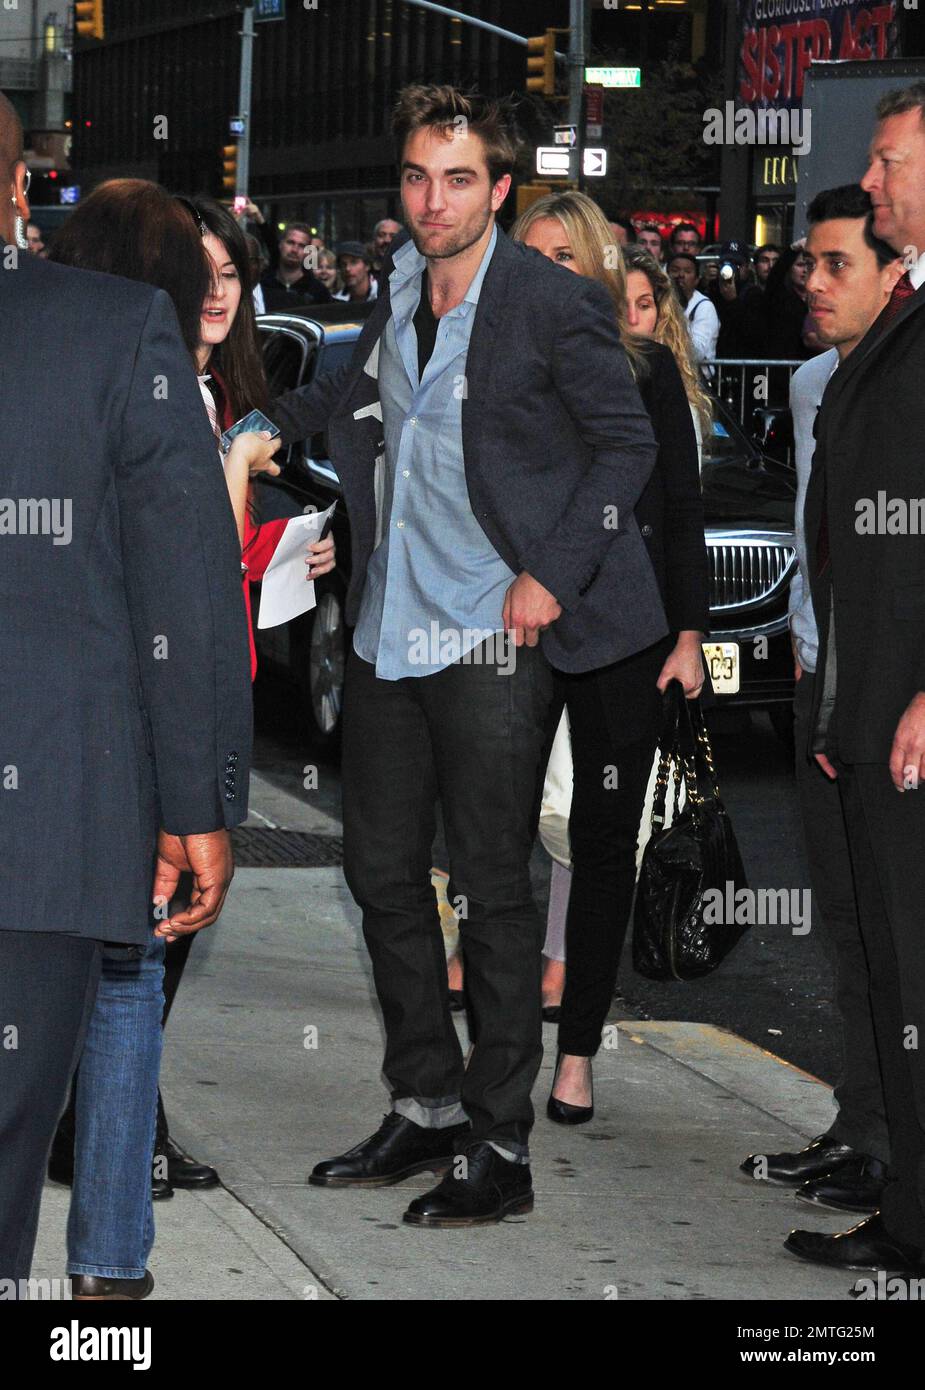 'Twilight Saga' star Robert Pattinson poses for photos outside the 'Late Show with David Letterman' studios. Pattinson, best known for his character Edward Cullen, is currently promoting the latest movie in the series 'Breaking Dawn Part 1' due in theaters on November 18. New York, NY. 8th November 2011.    . Stock Photo